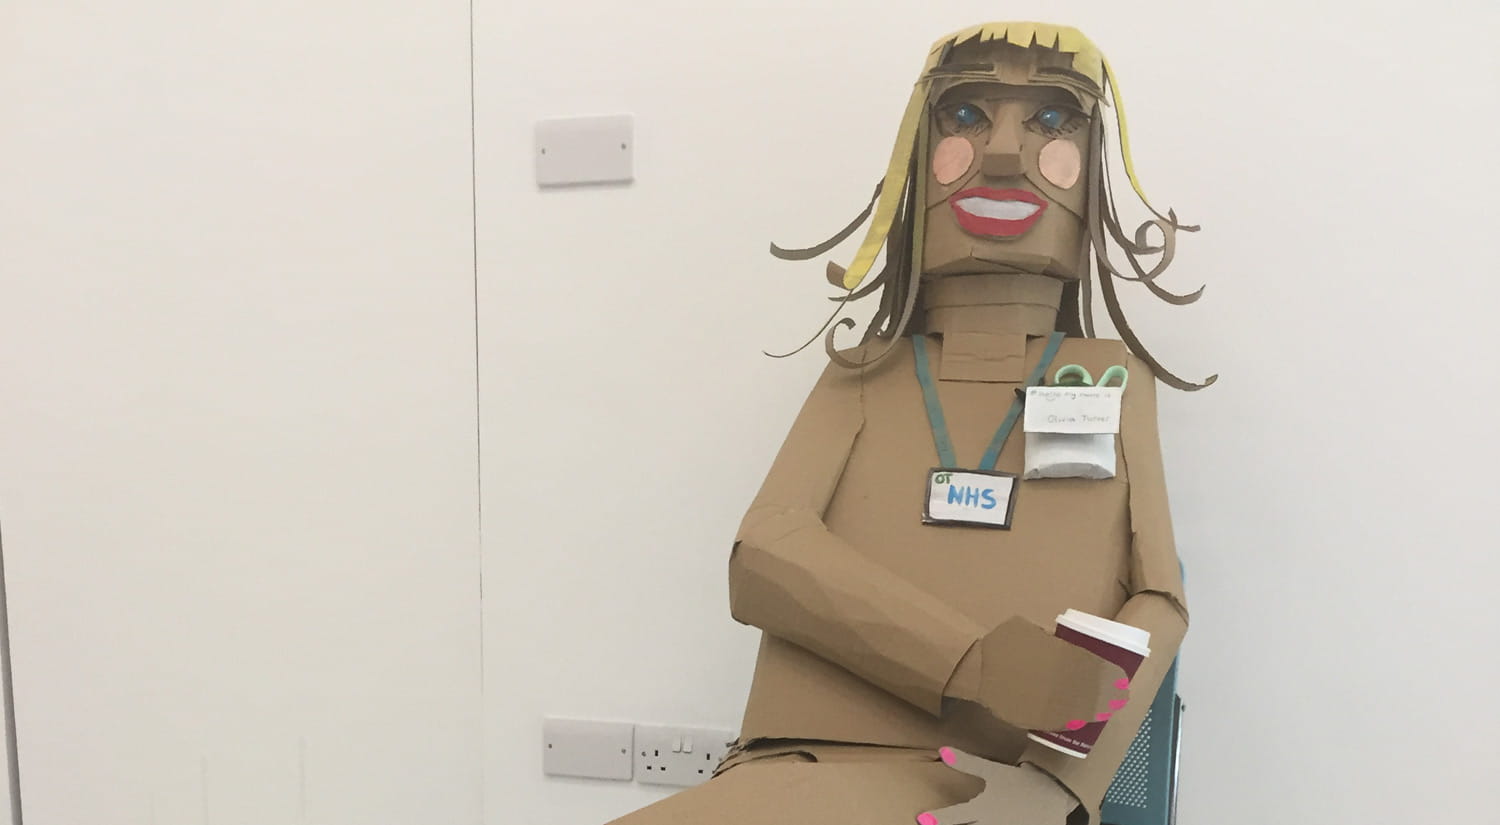 Life-size sculpture of an occupational therapist, created by Gracie's group